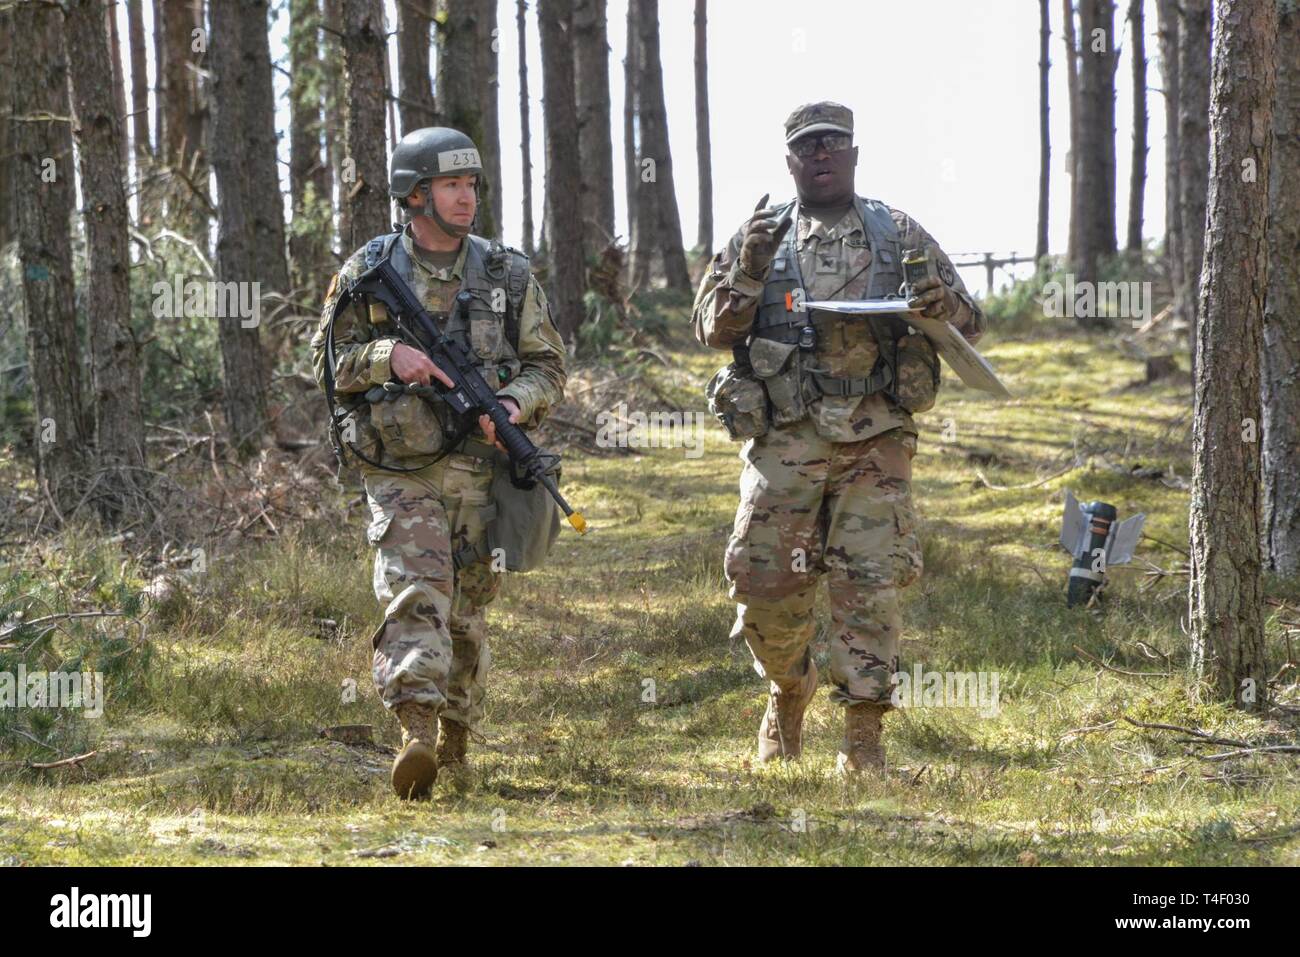 U.S. Army Maj. William Kirby, left, assigned to 2nd Cavalry Regiment, moves to his next objective after identifying a simulated unexploded ordnance while testing for the Expert Field Medical Badge at the 7th Army Training Command’s Grafenwoehr Training Area, Germany, March 29, 2019. To qualify for the badge, Soldiers from U.S. Army Europe, NATO, and other allied and partner nations must complete events such as land navigation, weapons function checks, written tests, medical treatments and evacuations, and a 12 mile ruck march. Stock Photo